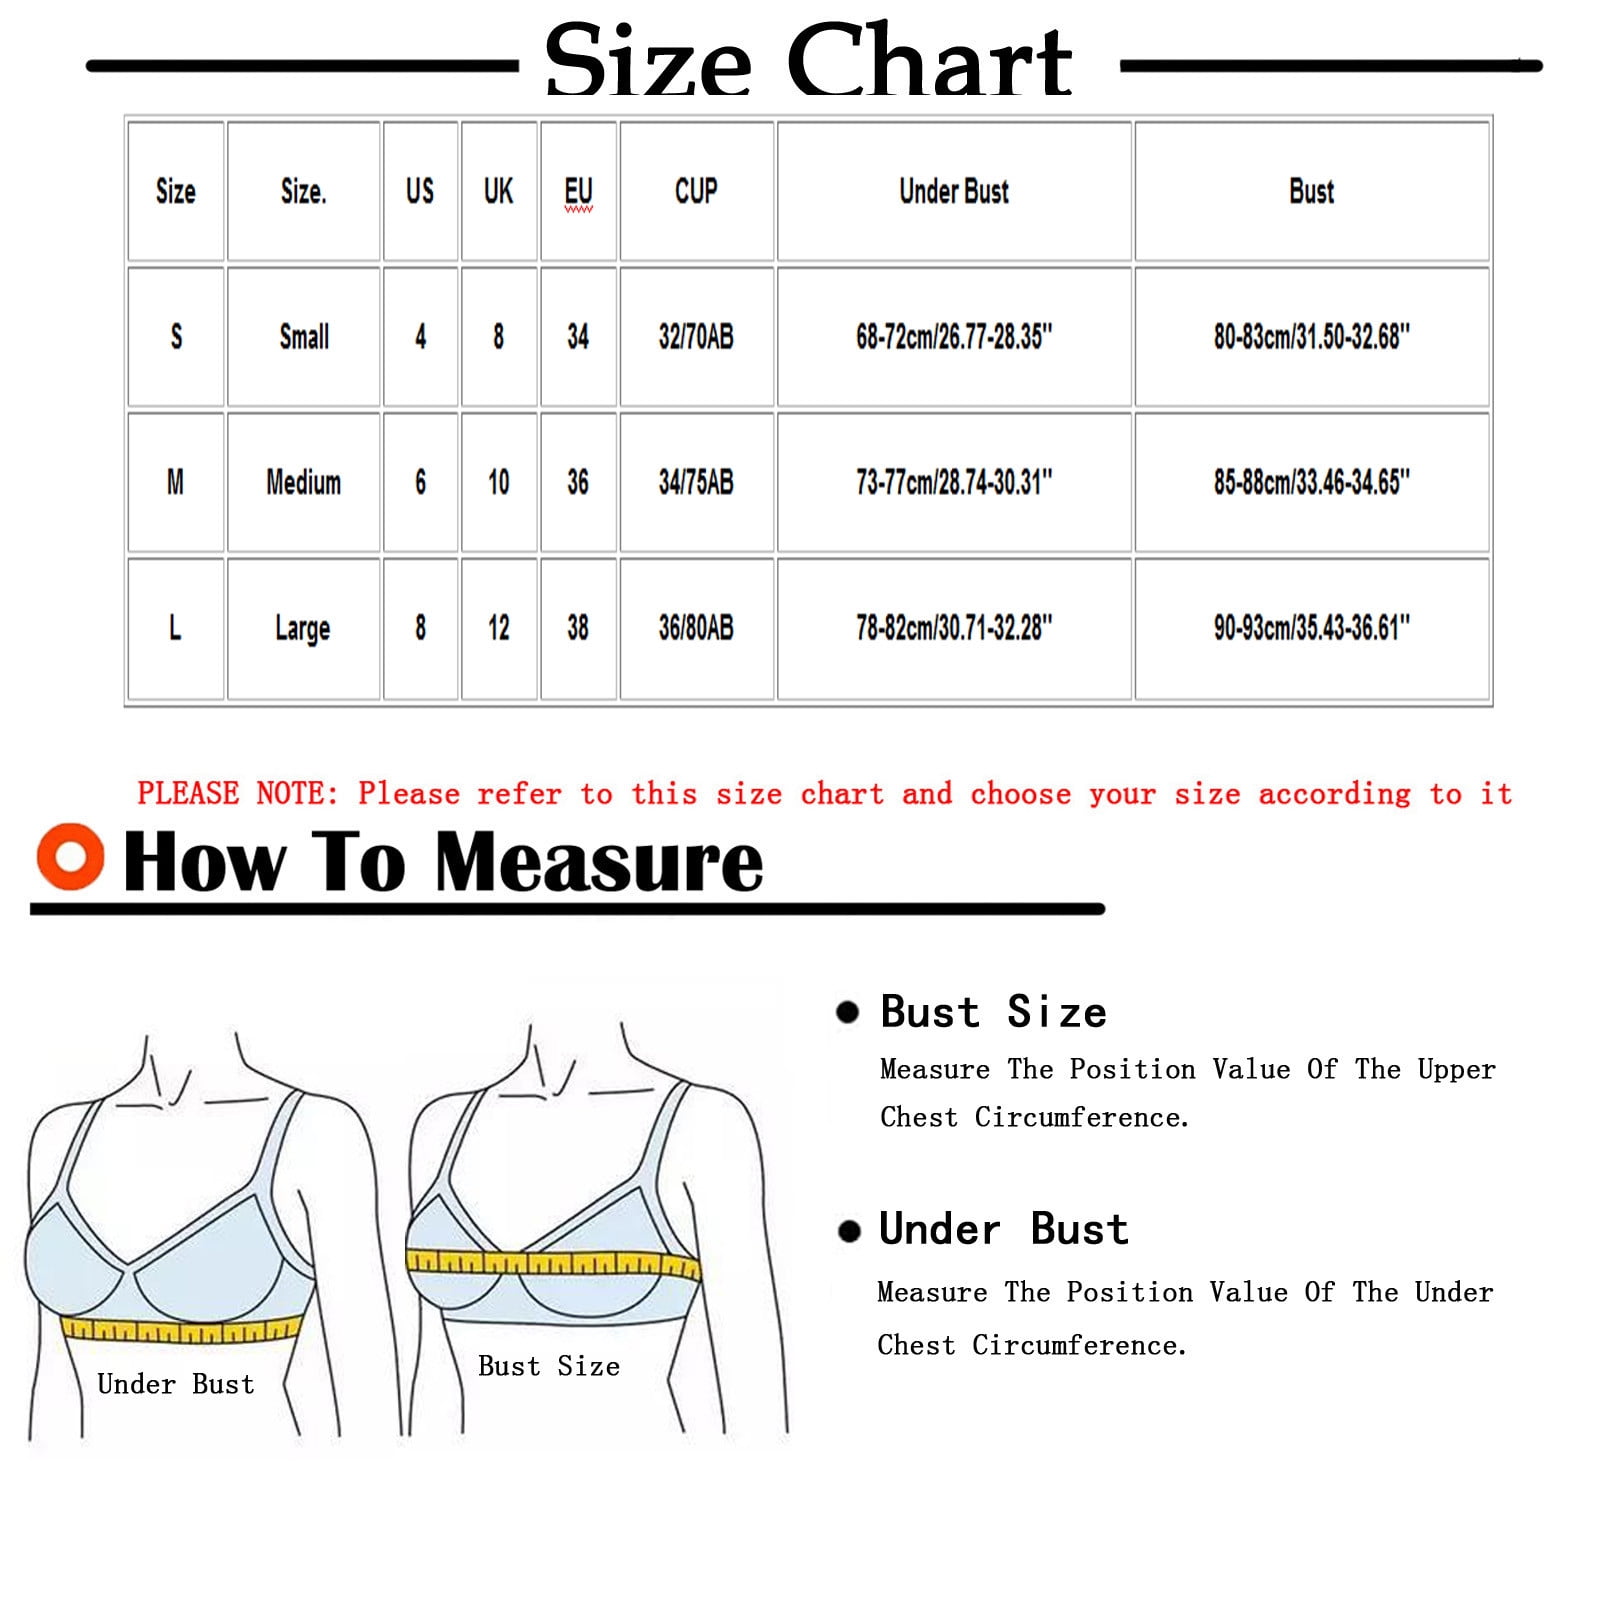 DeHolifer Women's Lisa Charm Bras Lace Mesh Chest Gathered Breathable Cool  Bras Underwear Comfortable Without Steel Rings Bras Gold L